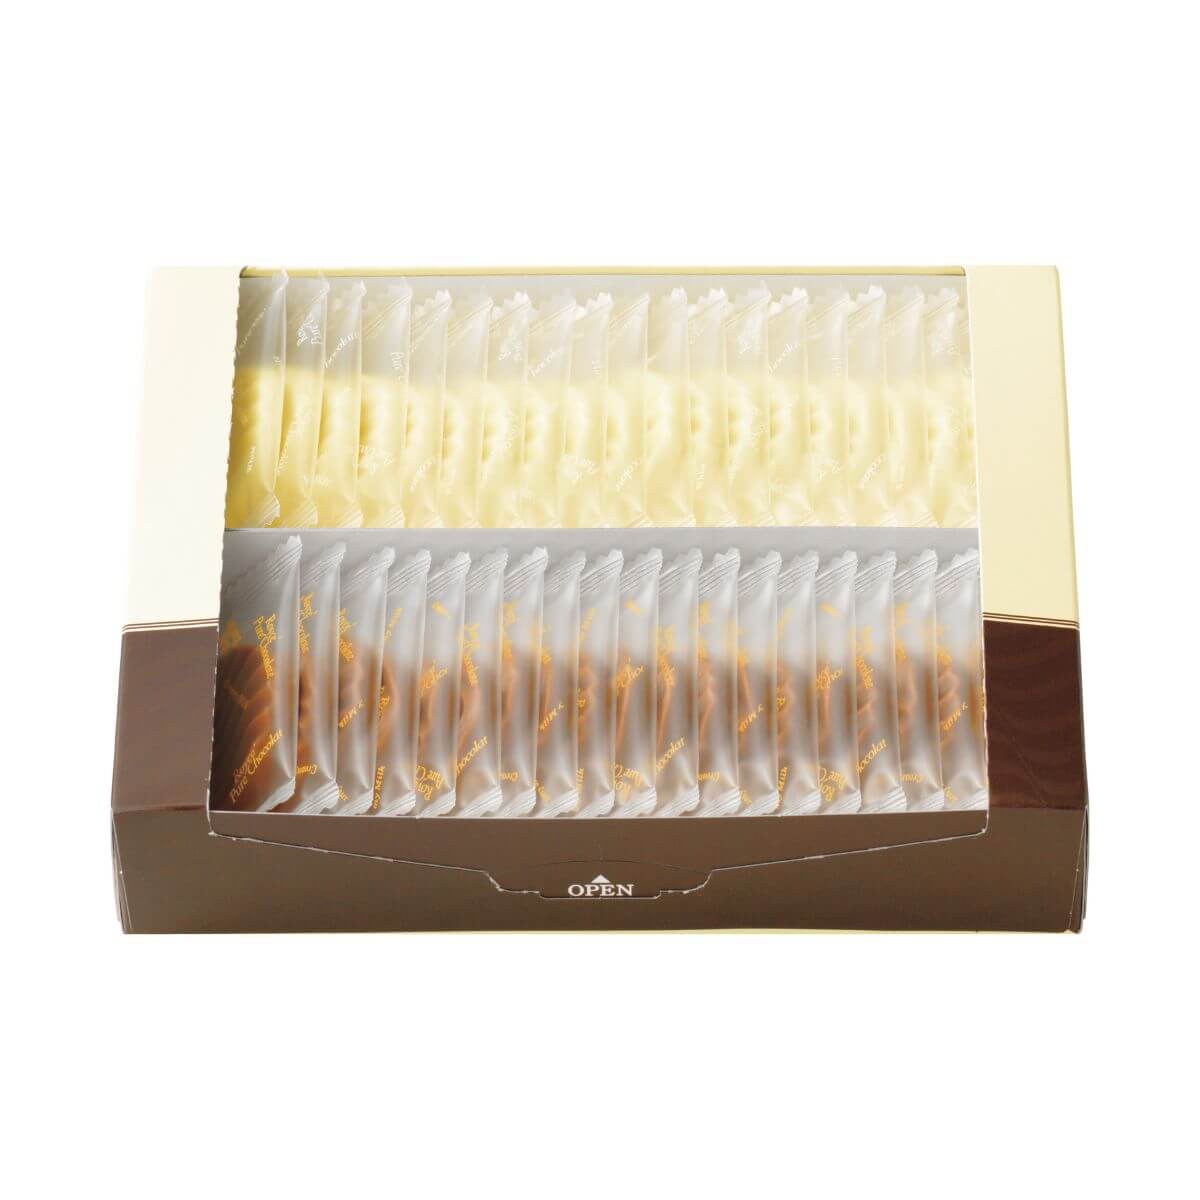 ROYCE' Chocolate - Pure Chocolate "Creamy Milk & White" - Image shows a box in white and brown filled with individually-wrapped white chocolates on top and brown chocolates on the bottom.